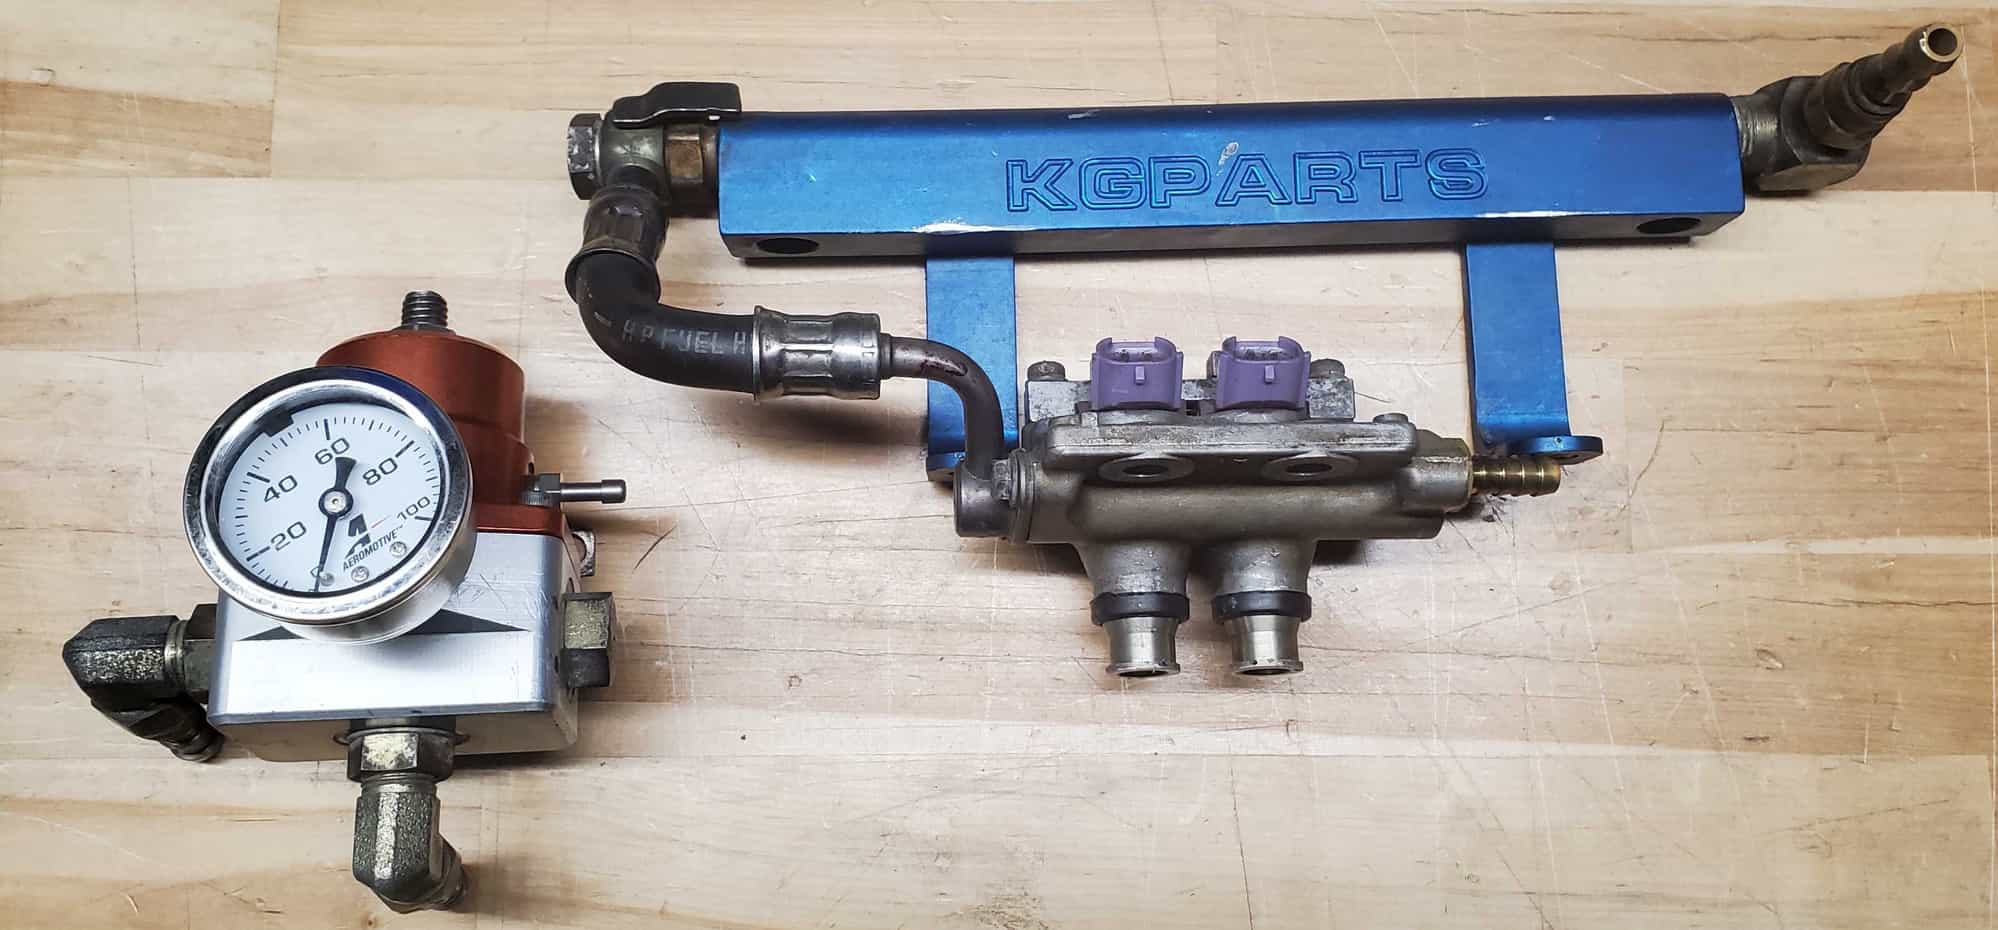 Engine - Intake/Fuel - KG parts secondary fuel rail, OEM primary rail w/ 550cc injectors and Aeromotive FPR - Used - 1993 to 2002 Mazda RX-7 - Austin, TX 78610, United States